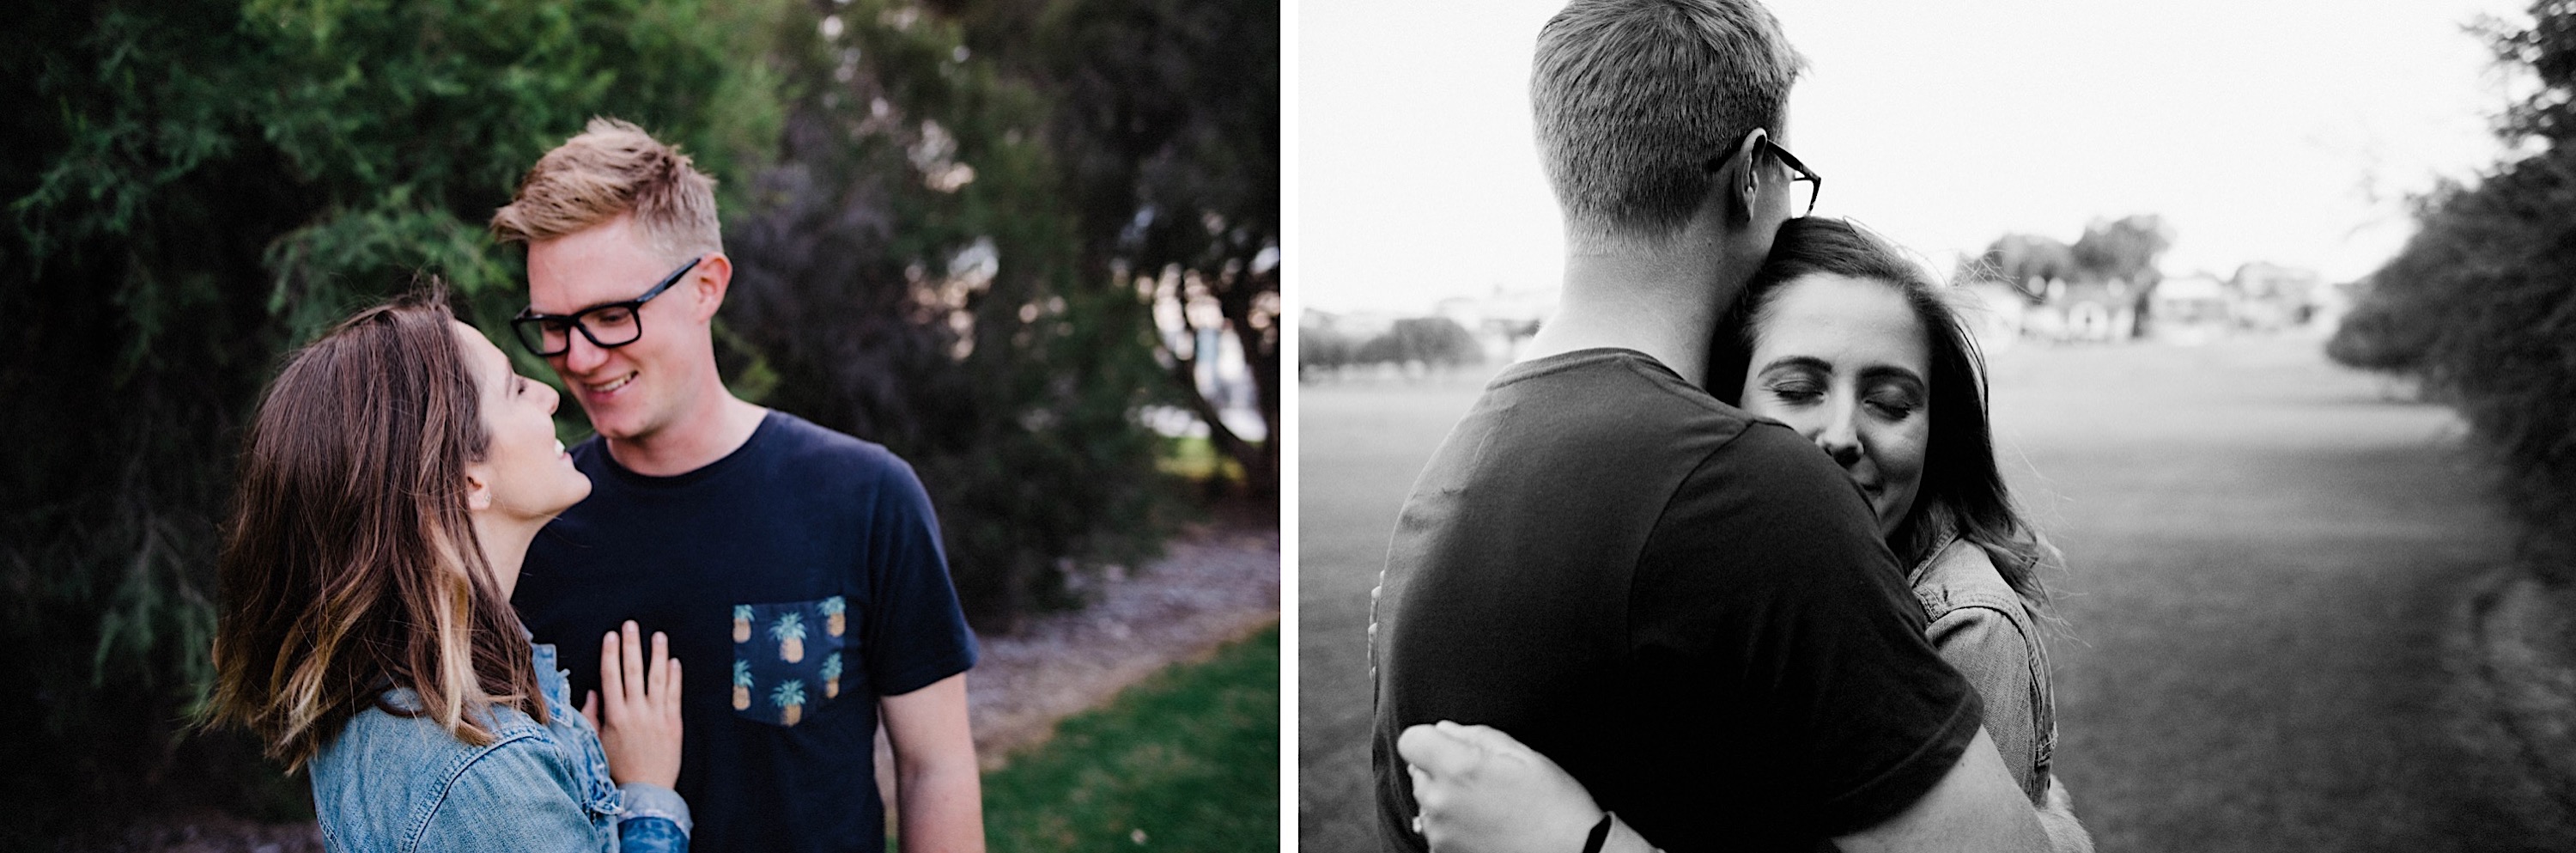 Lifestyle photography in Perth, Western Australia, of a young couple hugging.